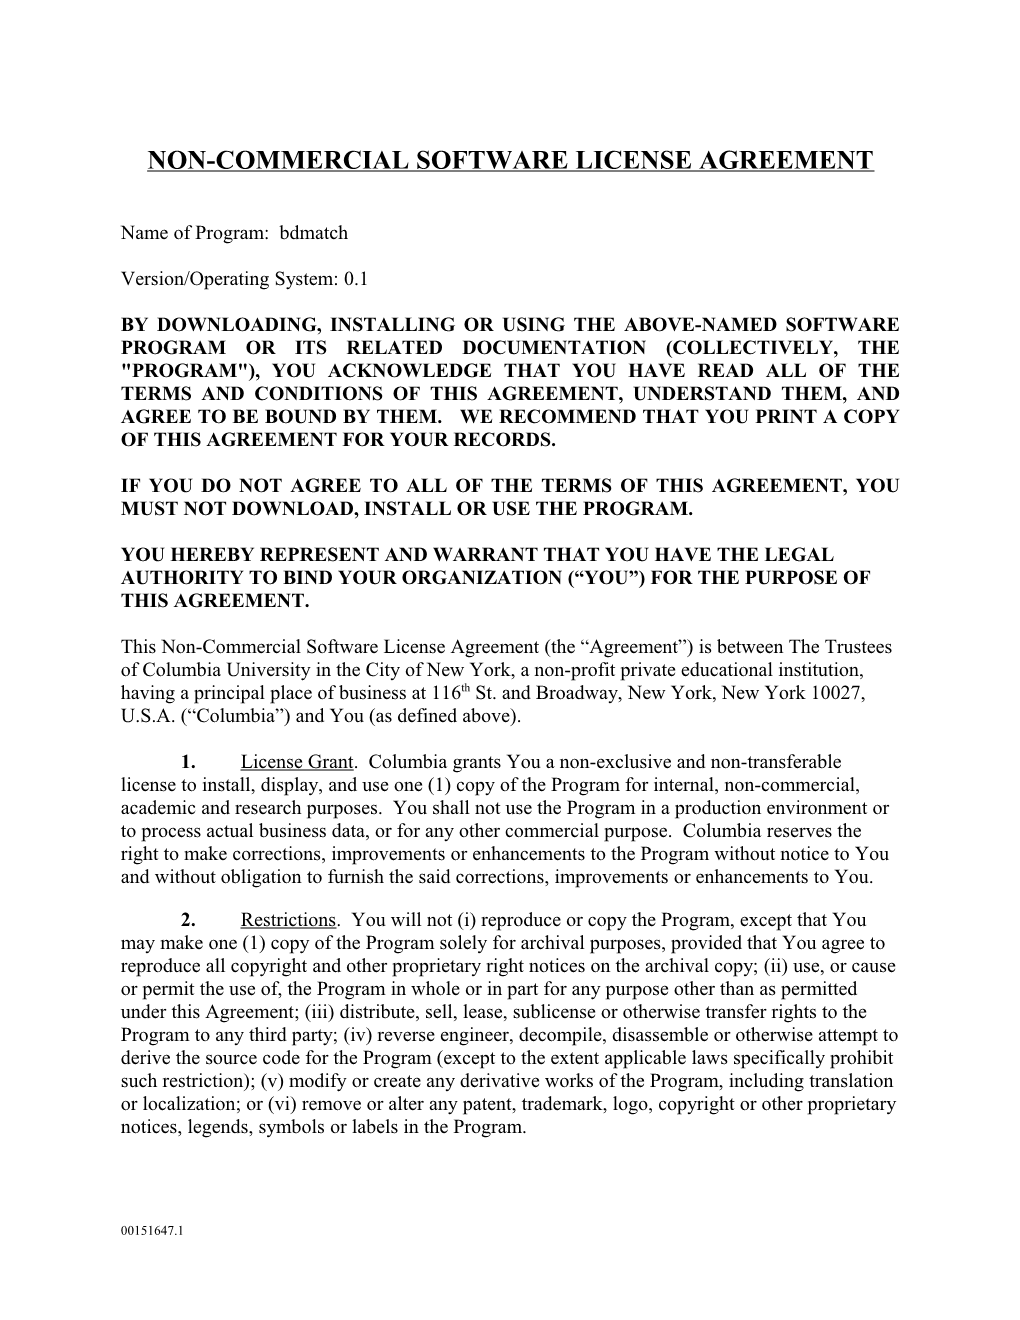 Non-Commercial Software License Agreement